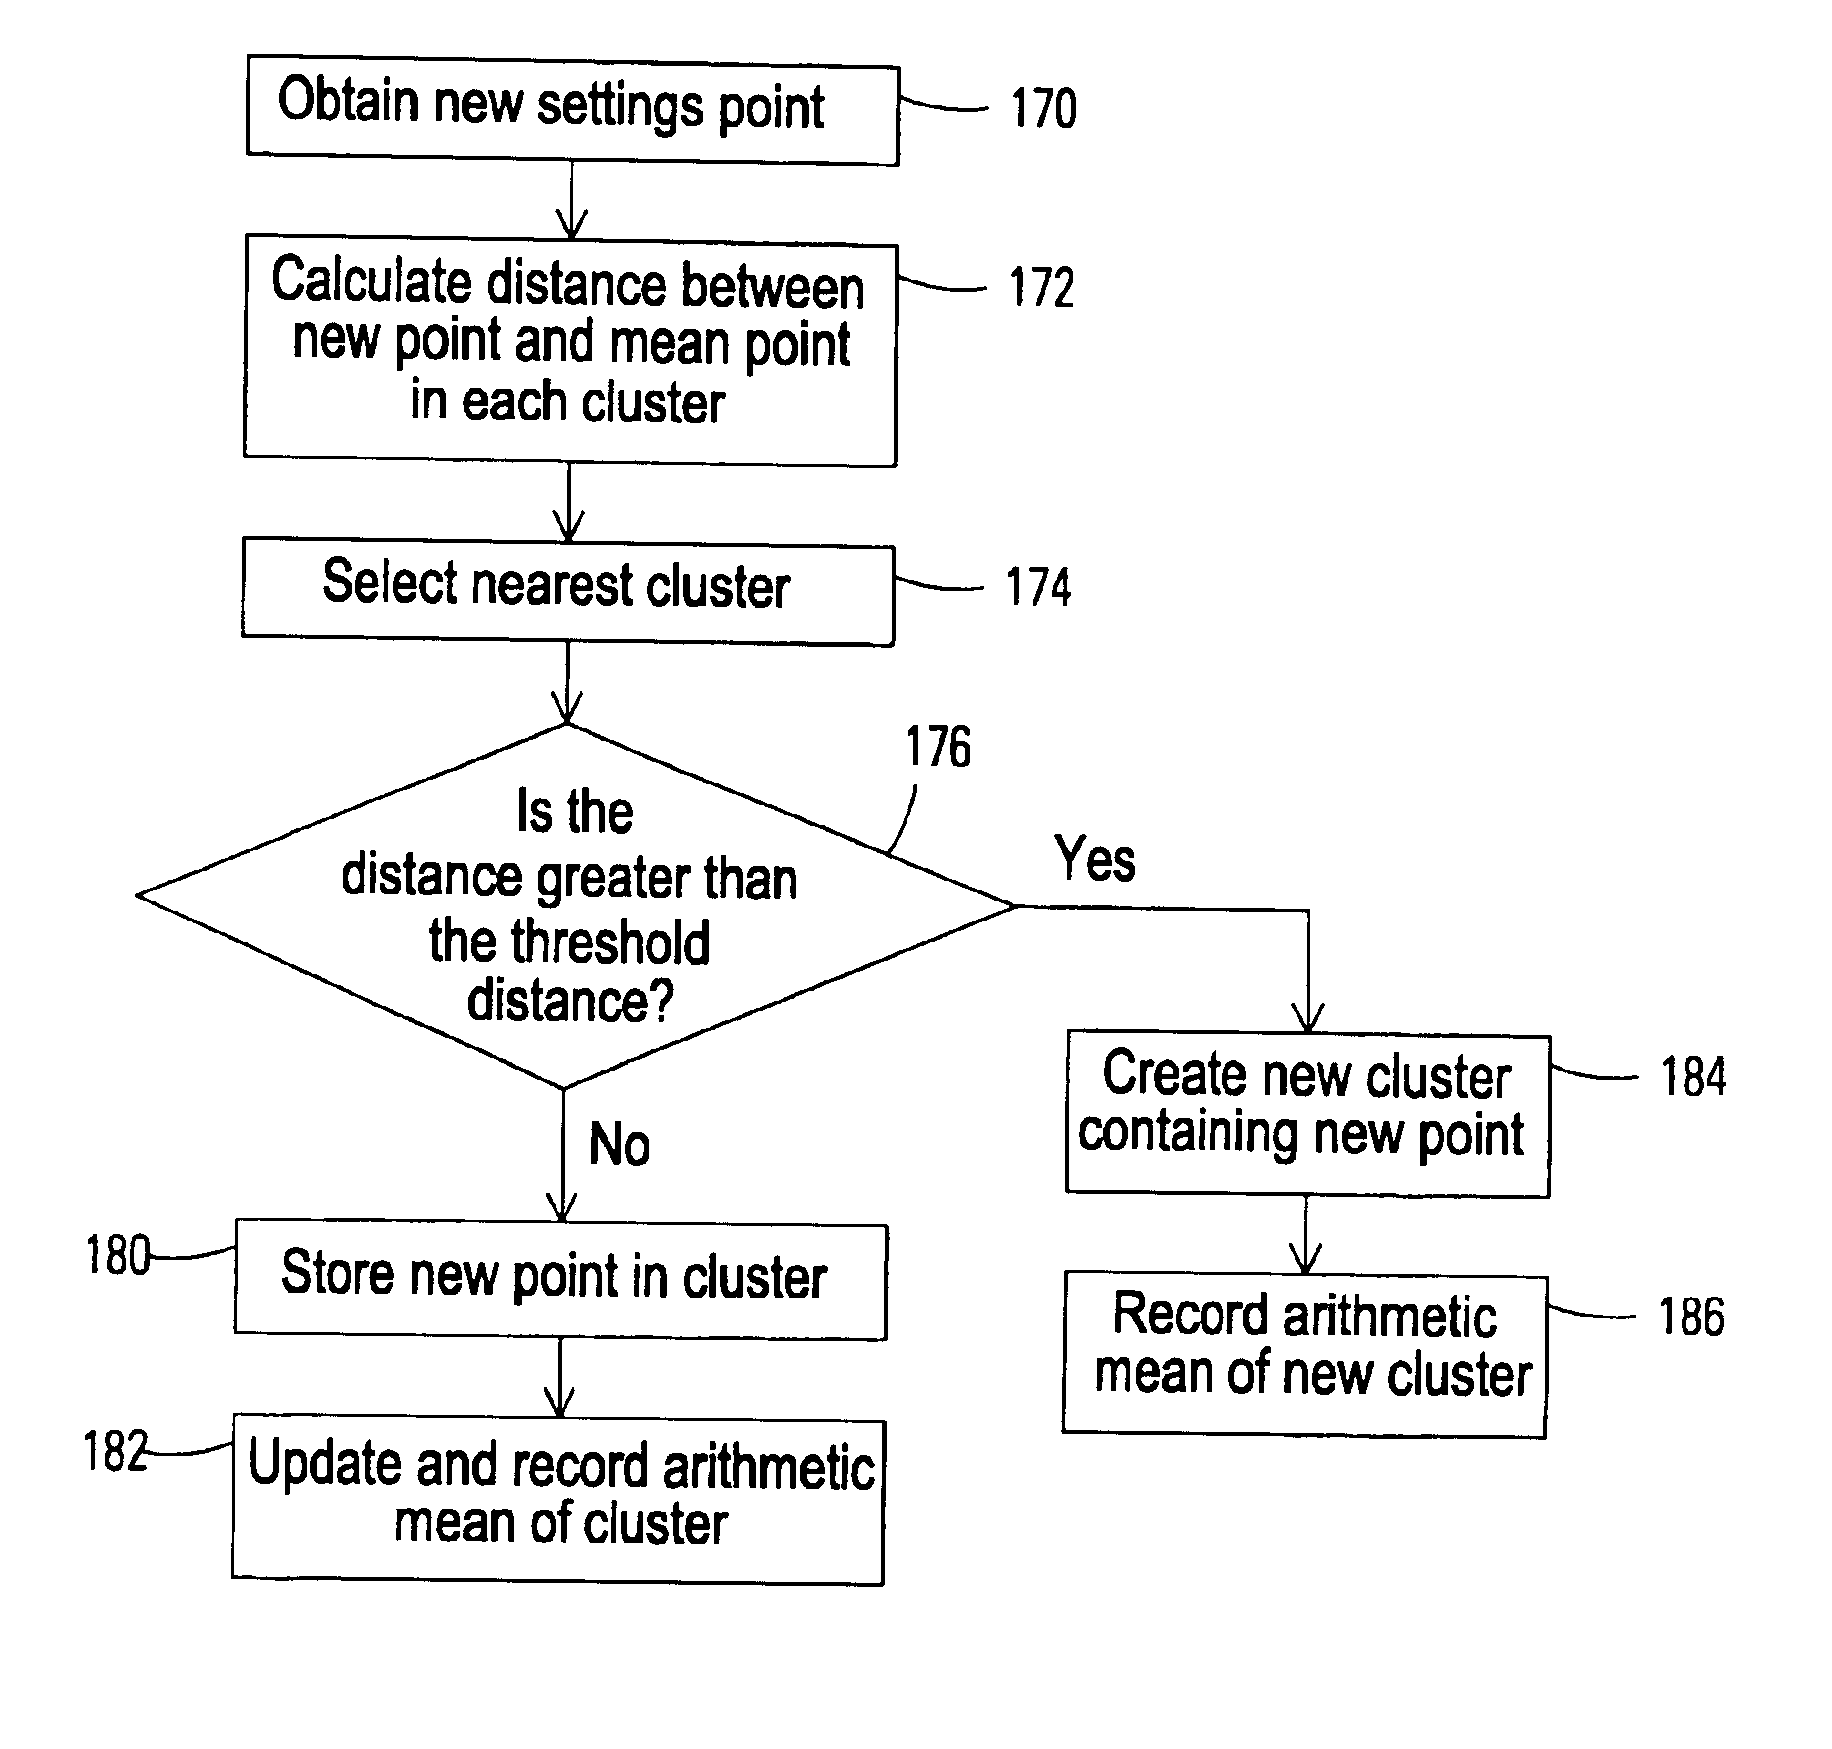 Adaptive and learning setting selection process for imaging device